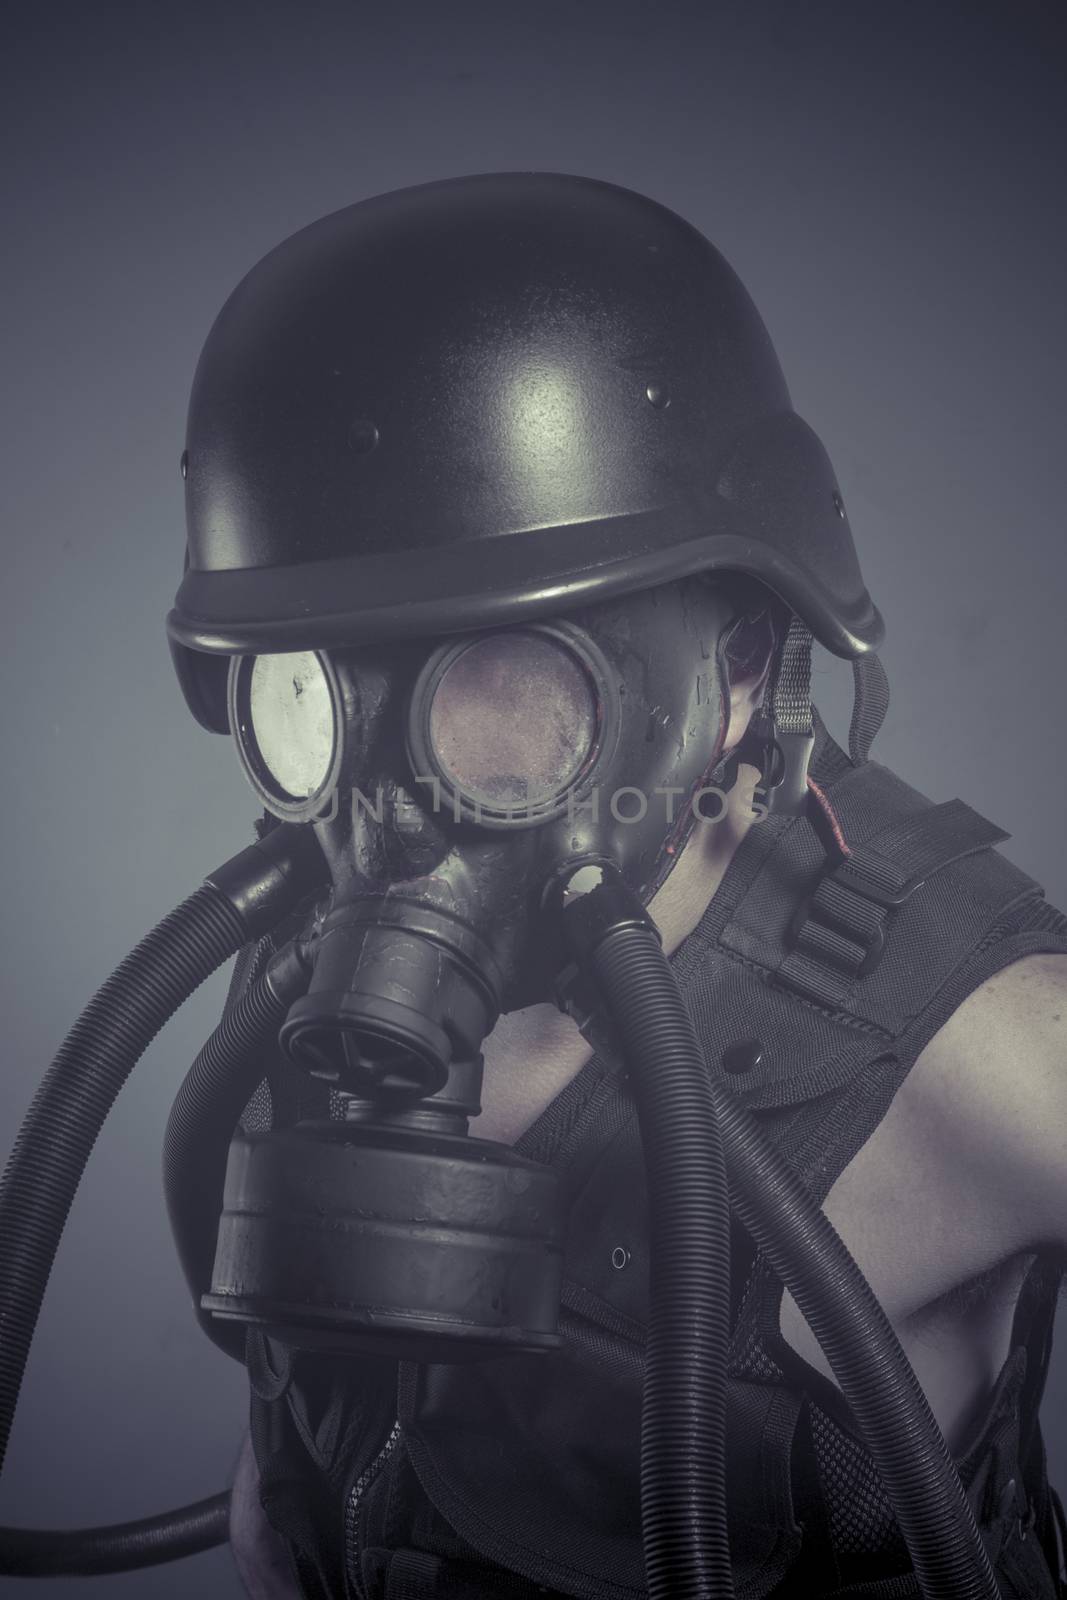 Inhalation, Man with black gas mask, pollution concept and ecolo by FernandoCortes